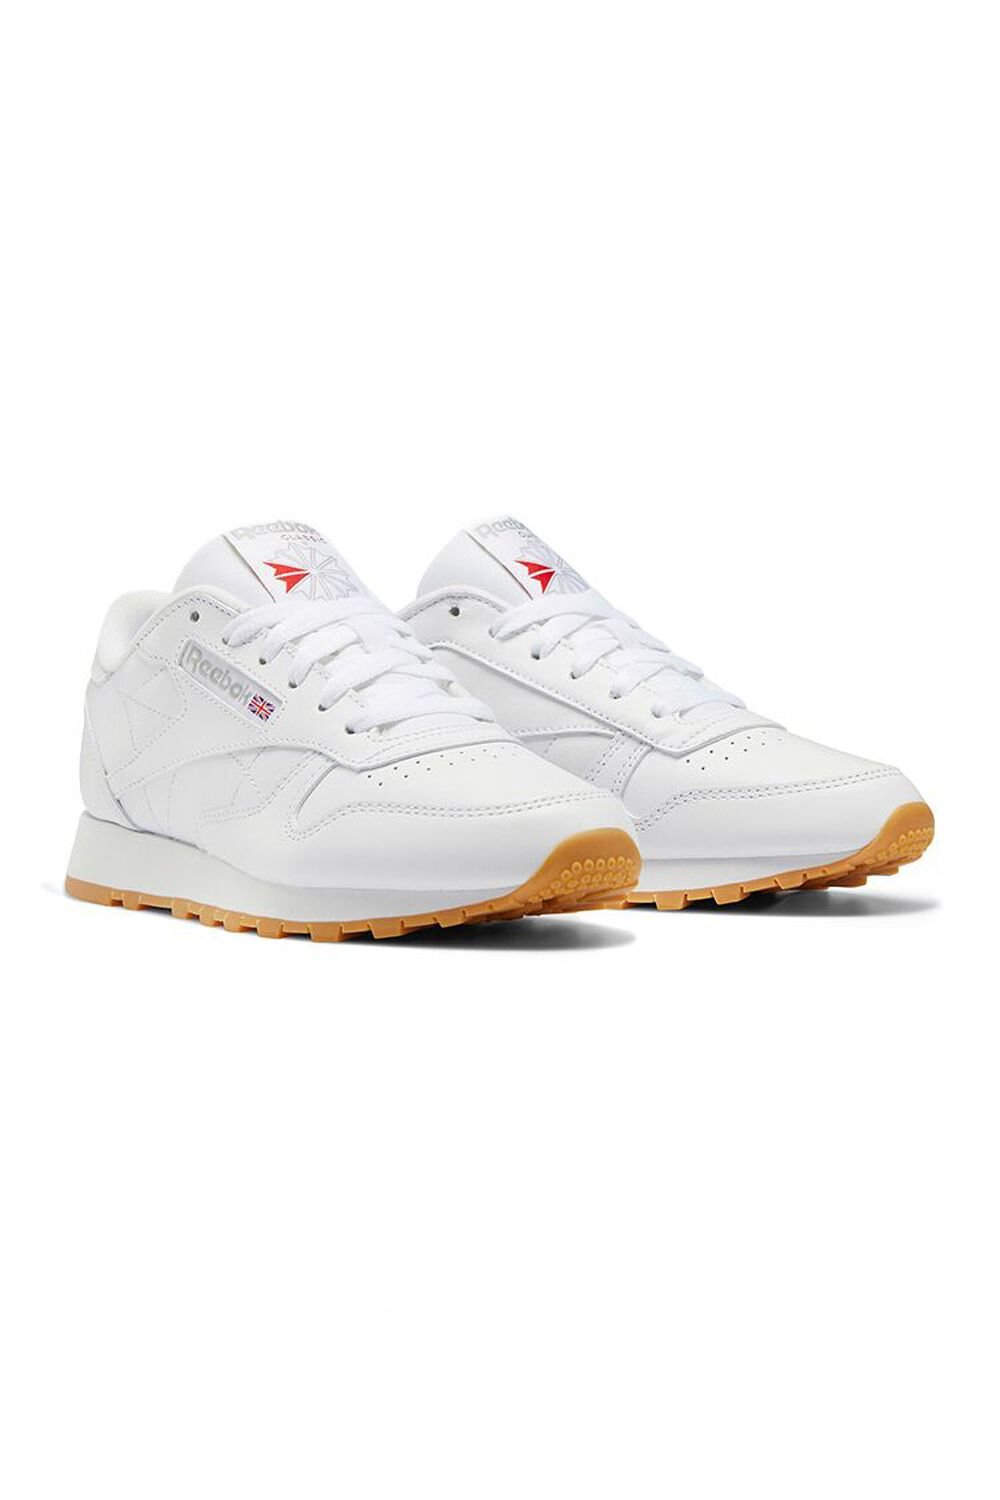 WHITE Reebok Classic Leather Shoes, image 1